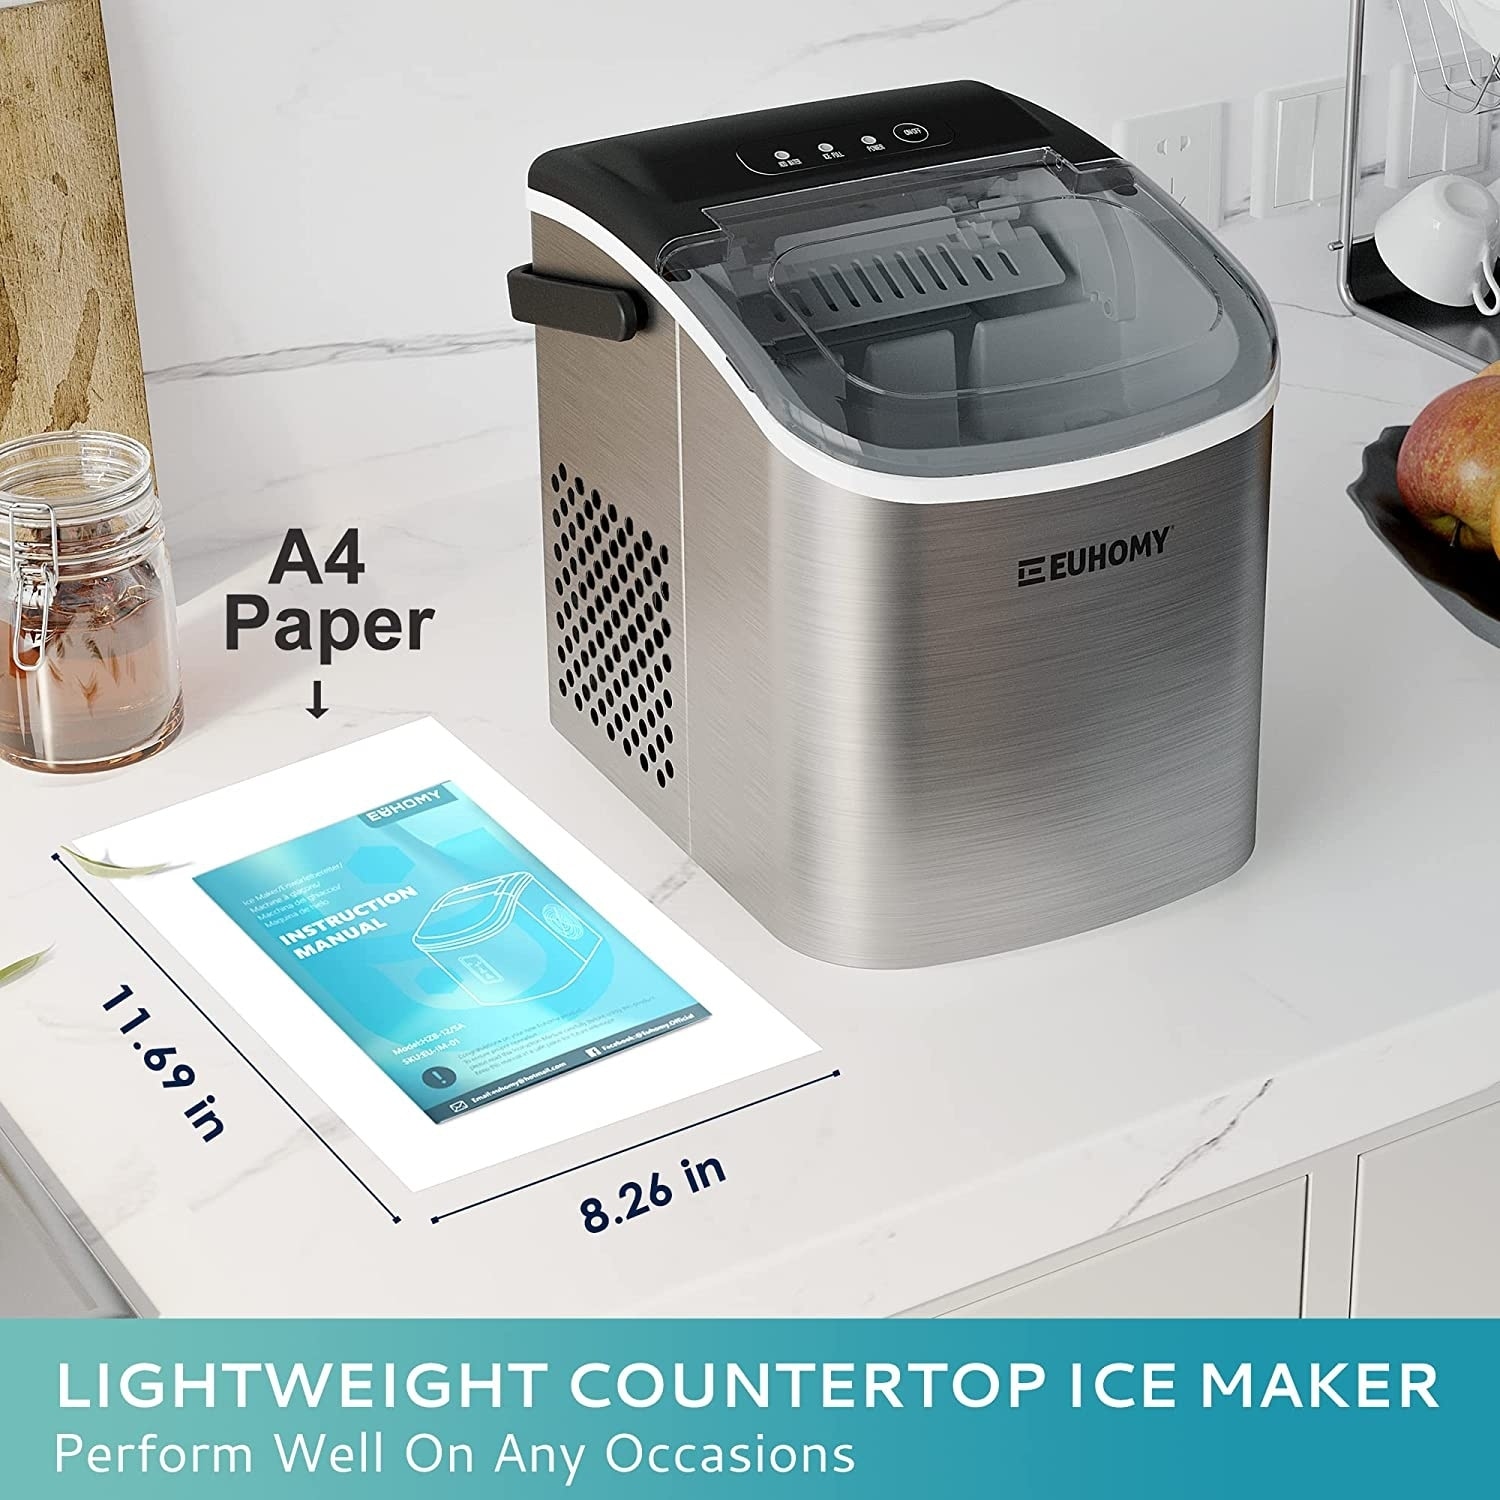 The Euhomy Ice Maker Experience: A Deep Dive into Superiority